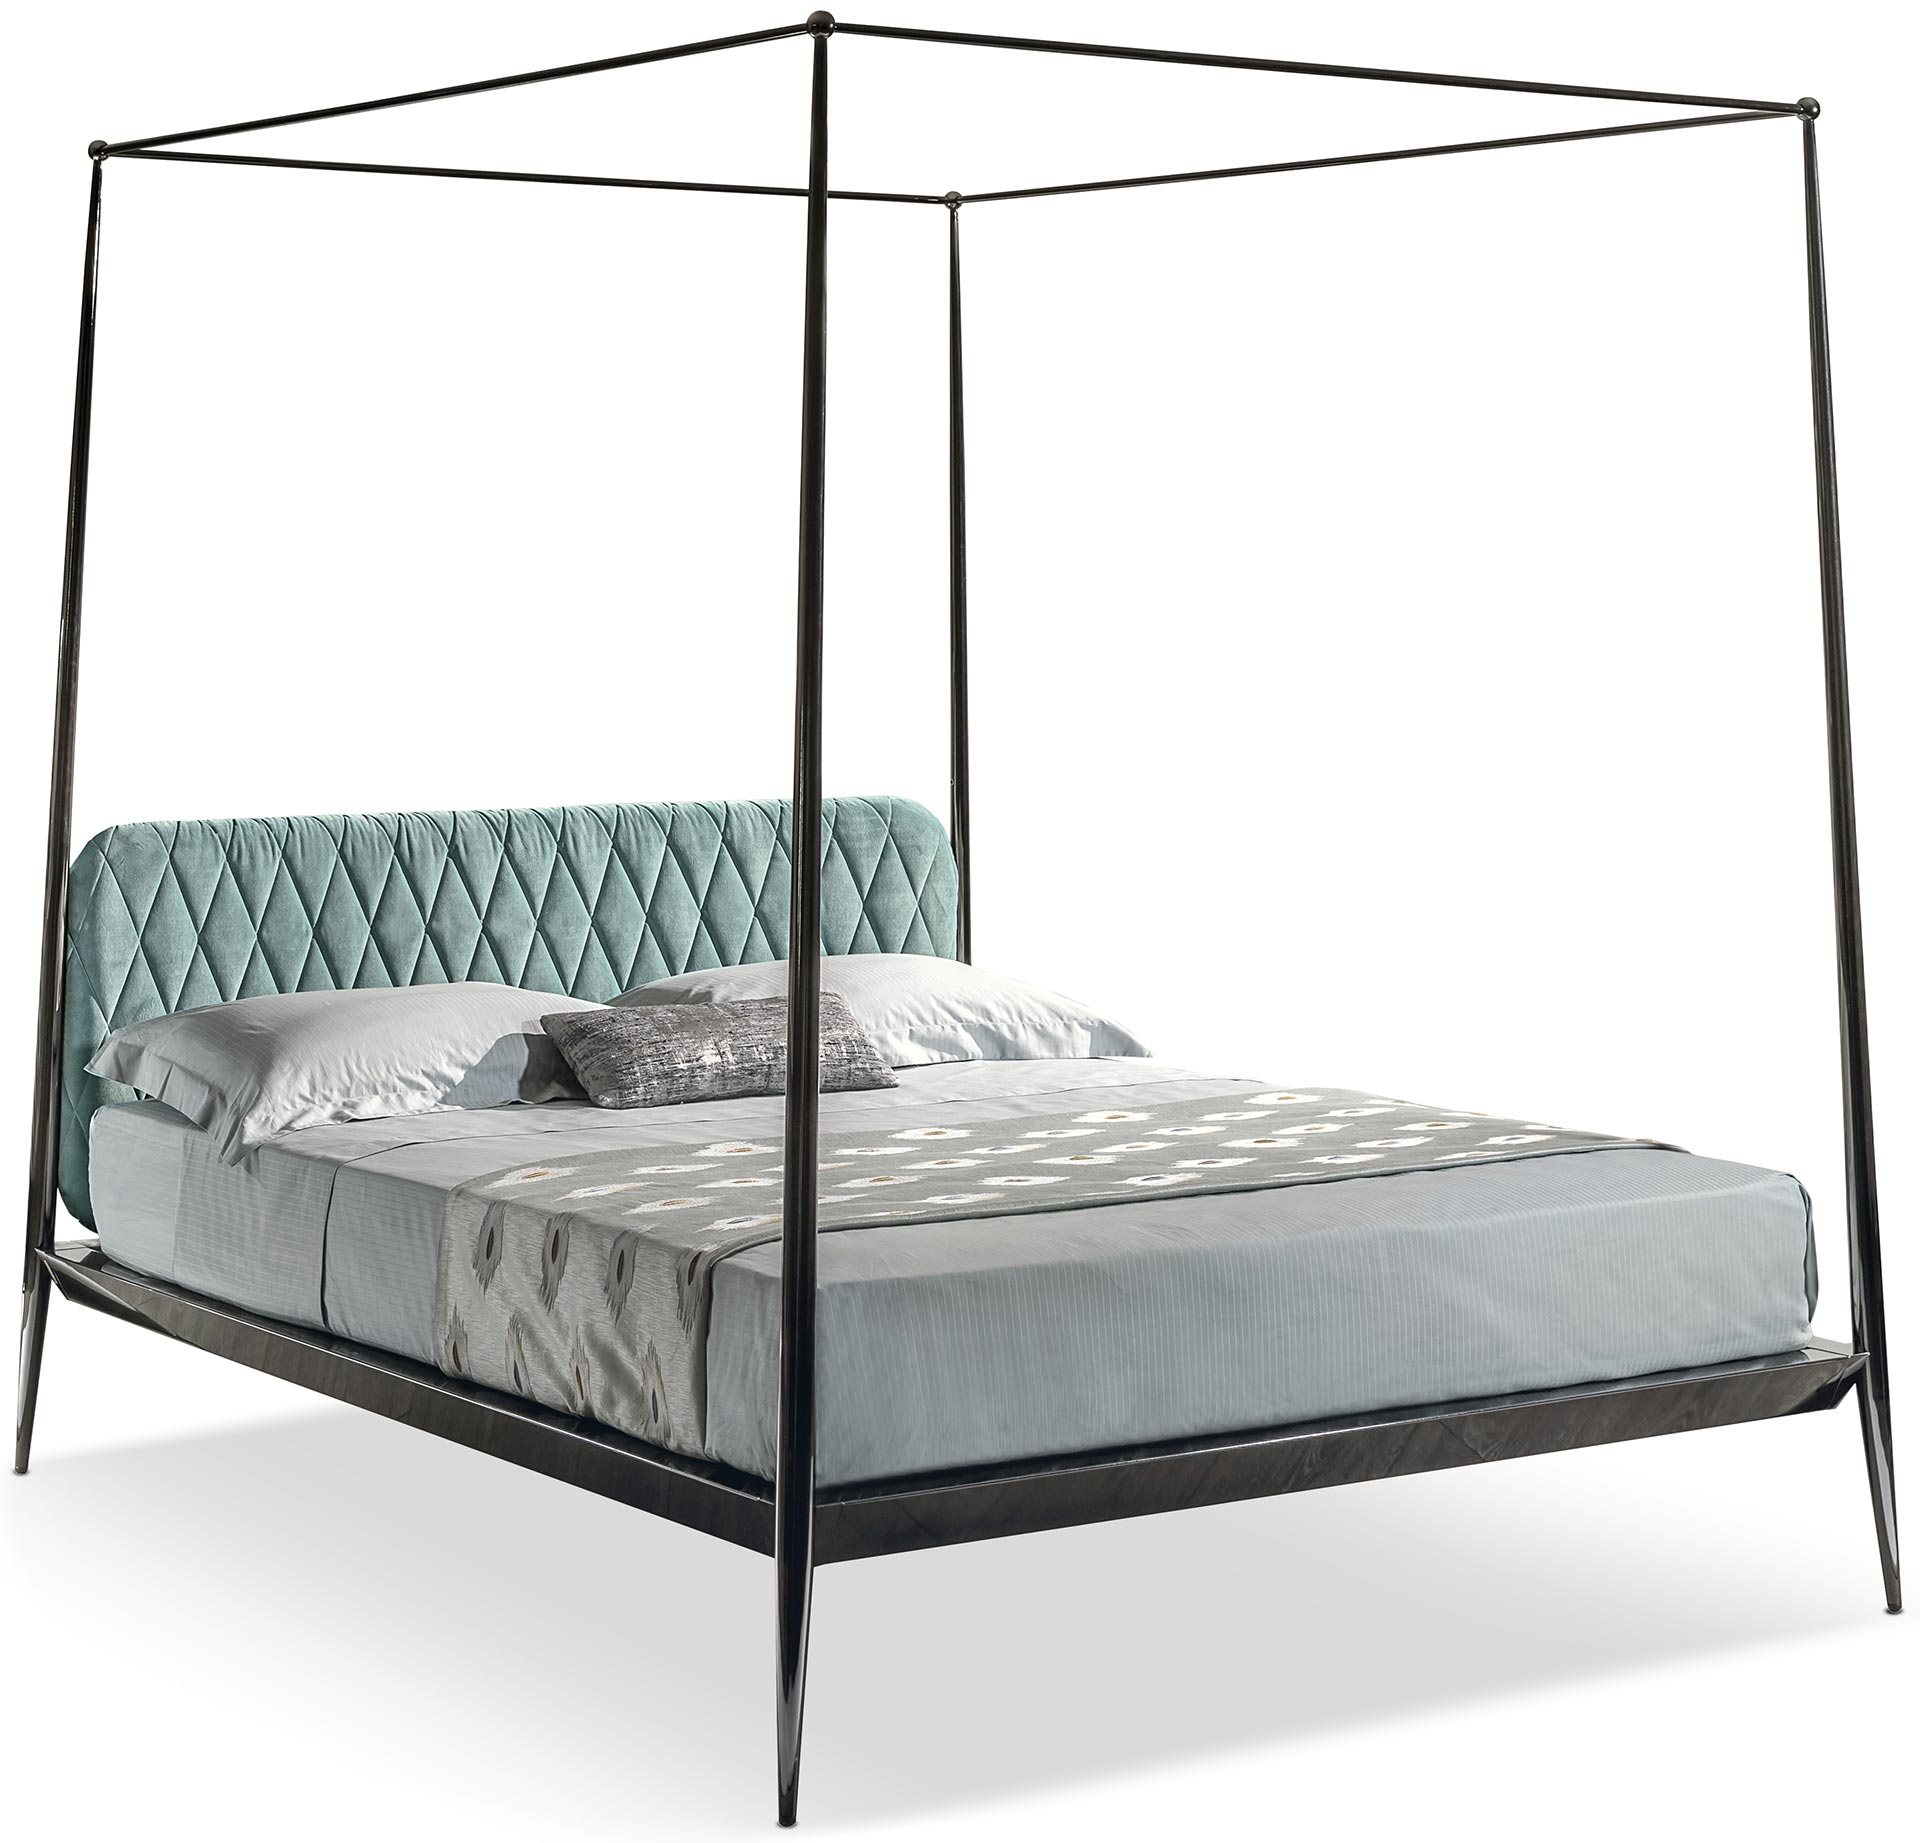 3163_urbino-padded-bed-with-canopy